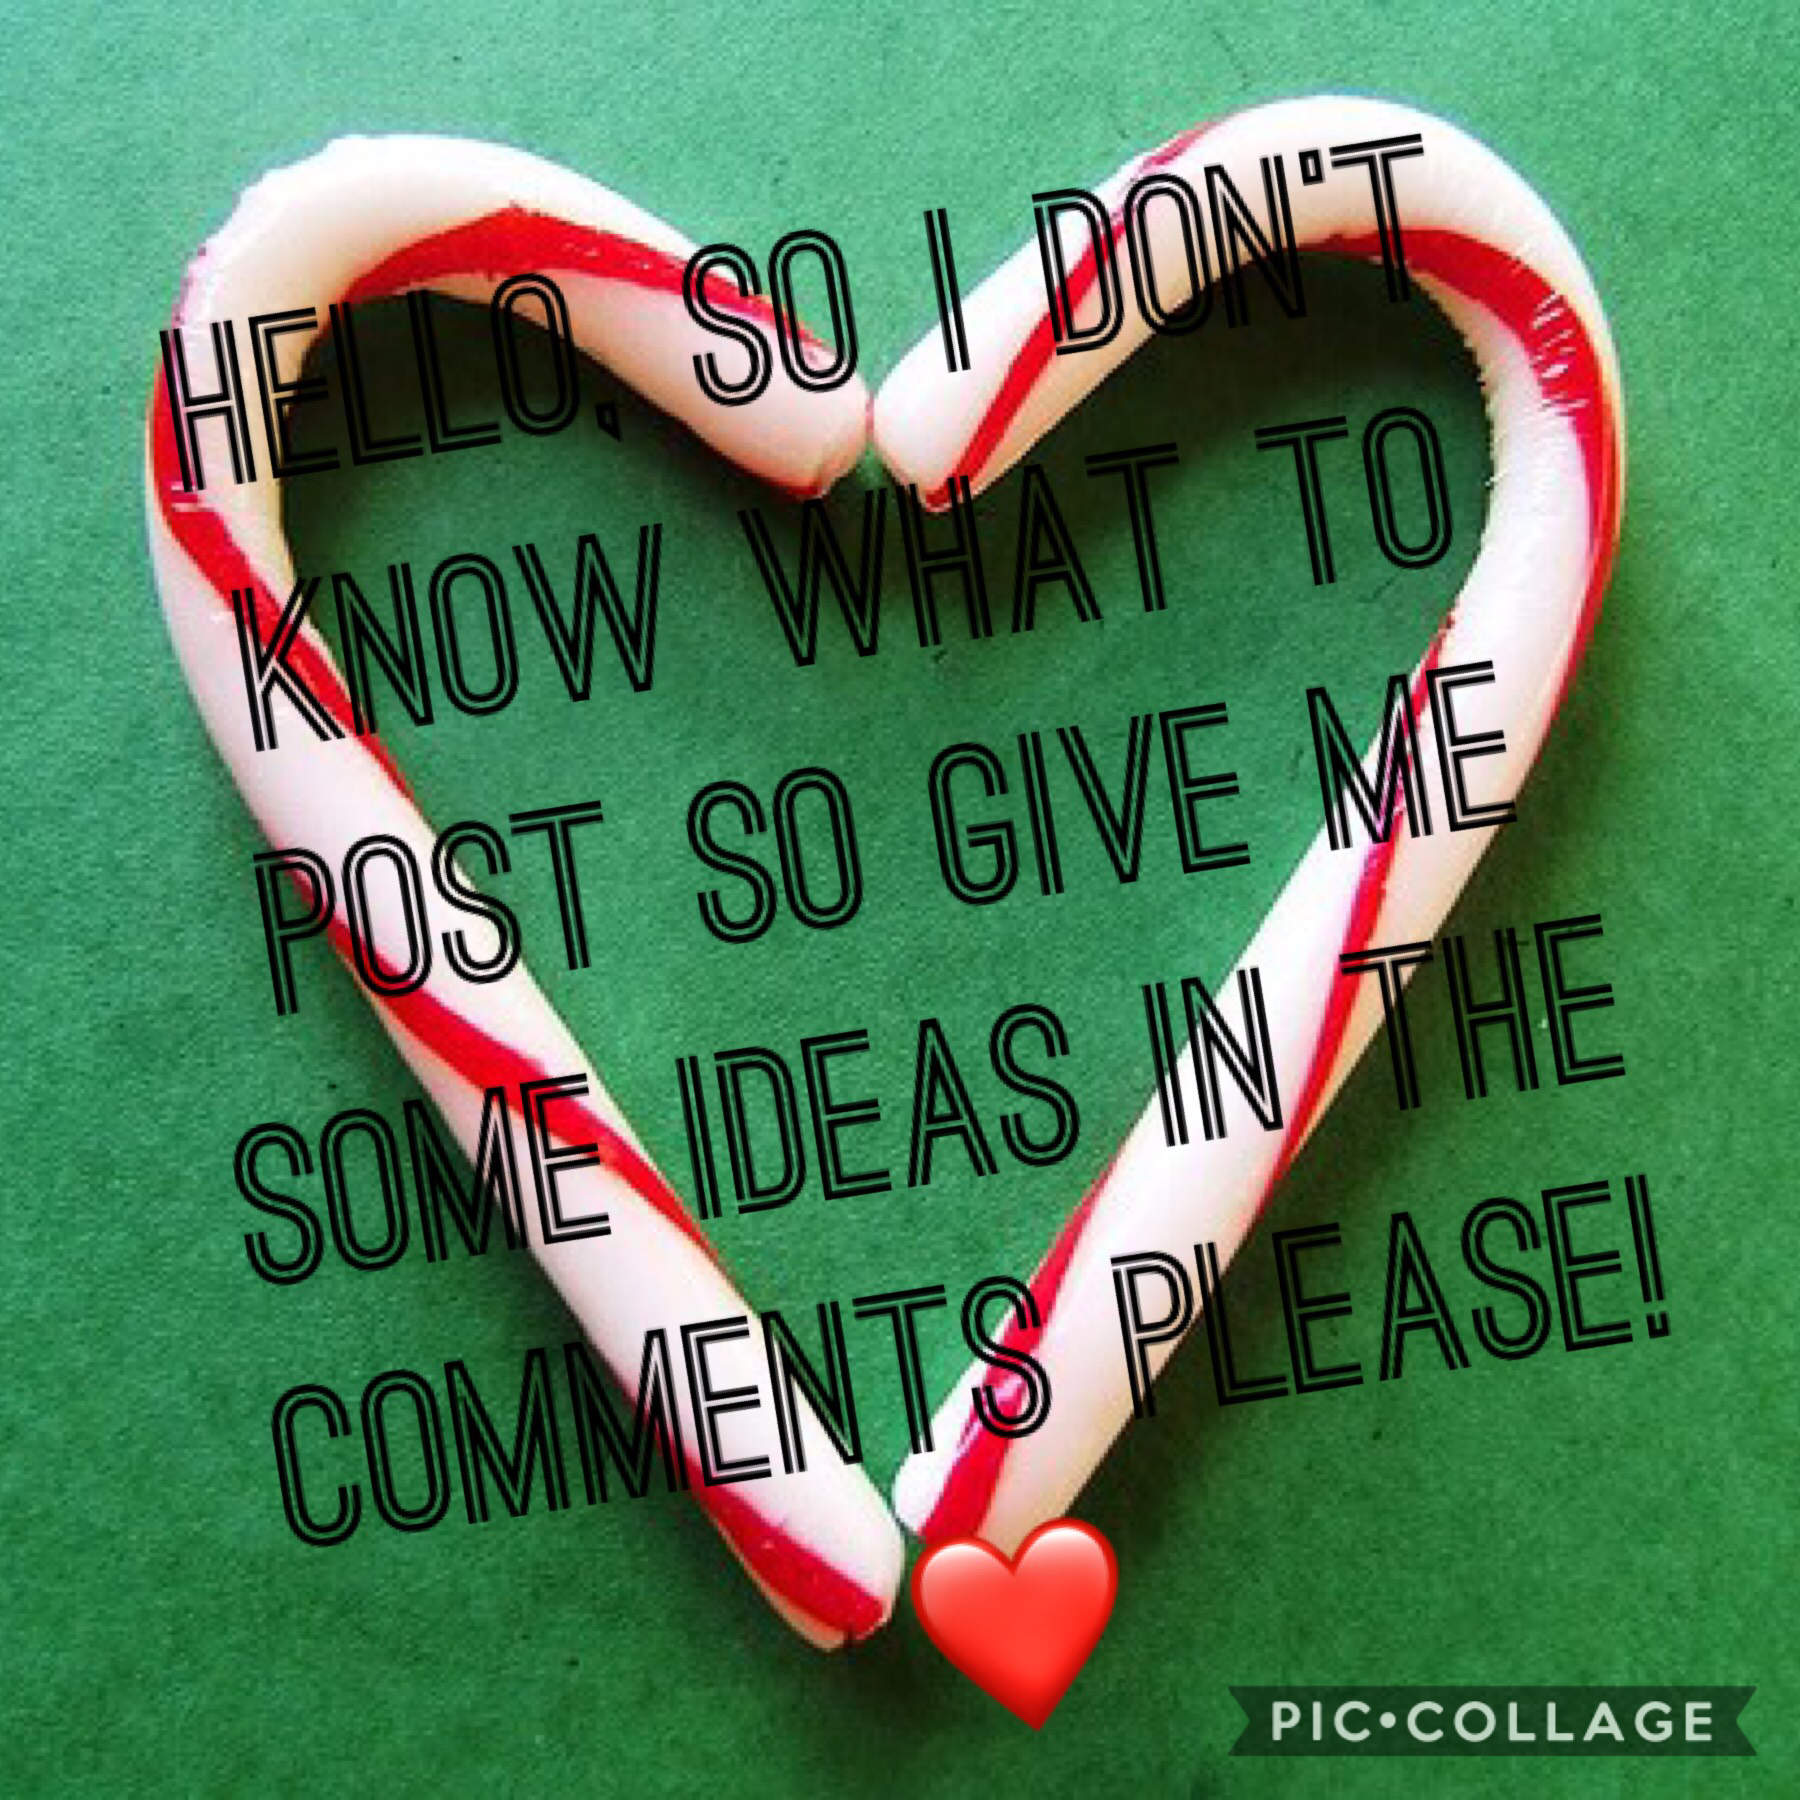 Please leave ideas in the comments!❤️